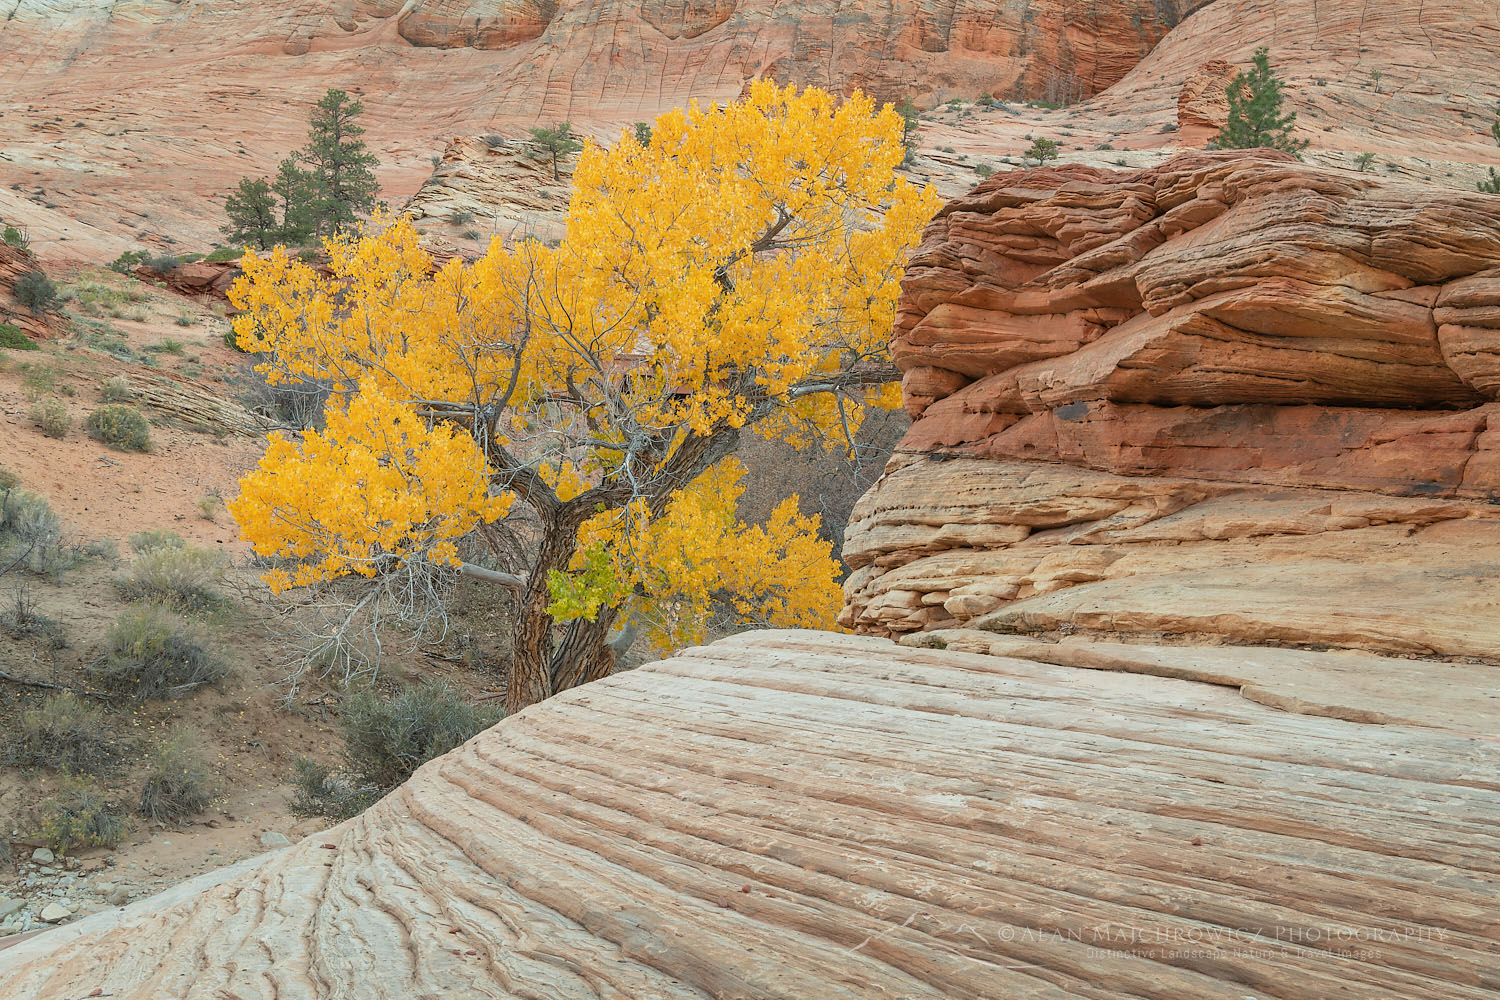 Cottonwood tree in fall foliage in East Canyon, Zion National Park Utah #76003